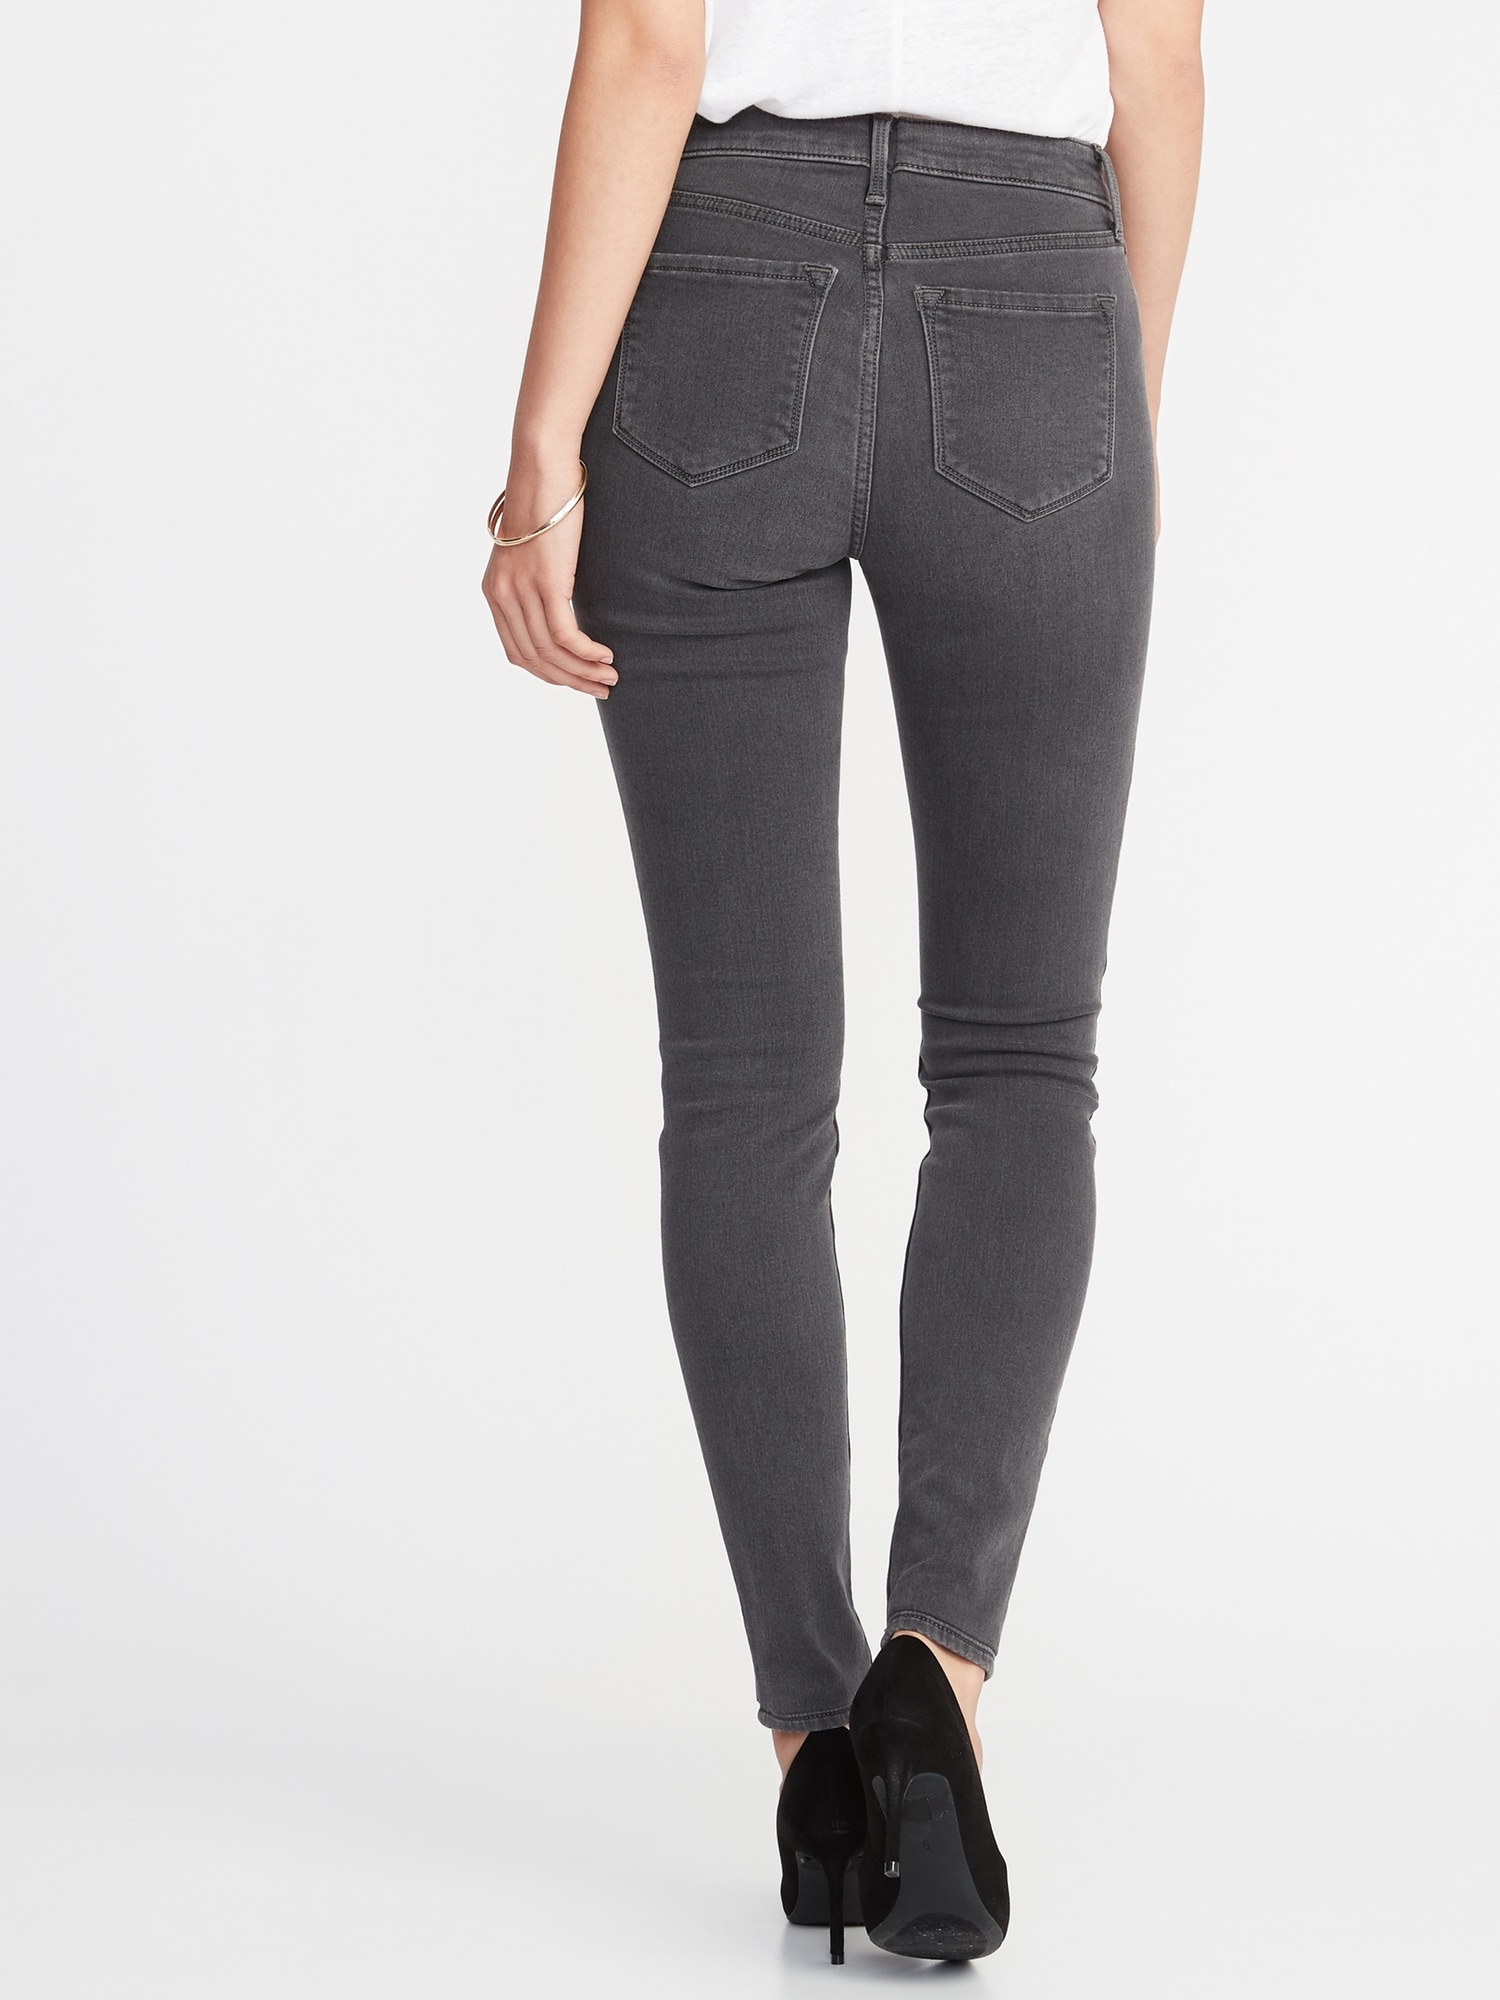 Mid-Rise Built-In Warm Rockstar Super Skinny Jeans for Women | Old Navy